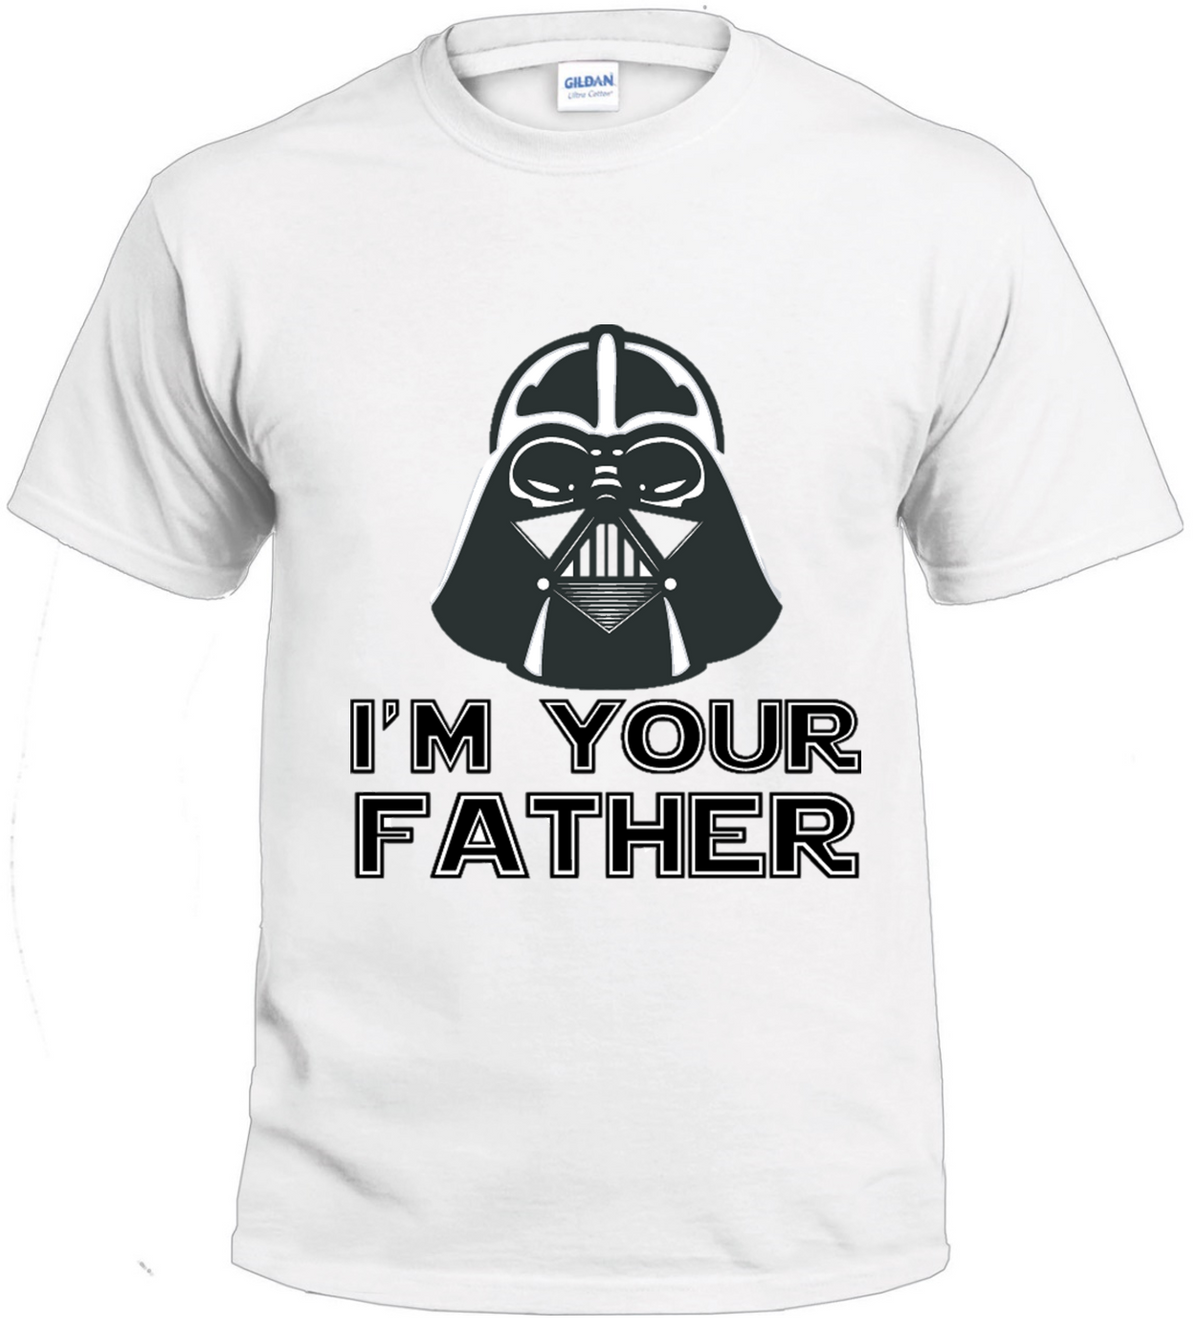 I'm Your Father t-shirt